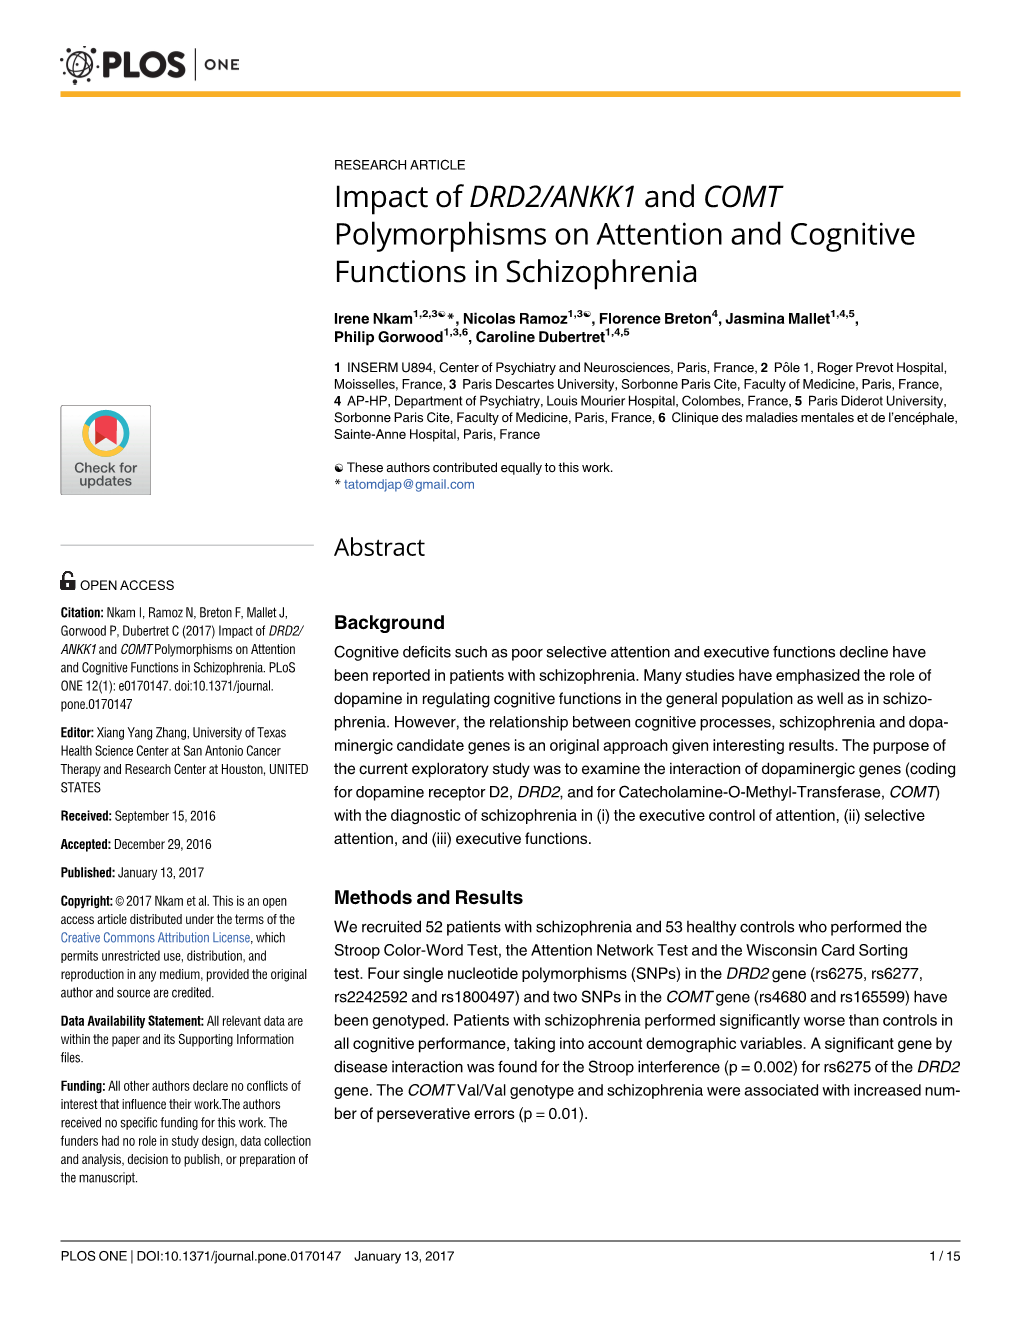 Impact of DRD2/ANKK1 and COMT Polymorphisms on Attention and Cognitive Functions in Schizophrenia